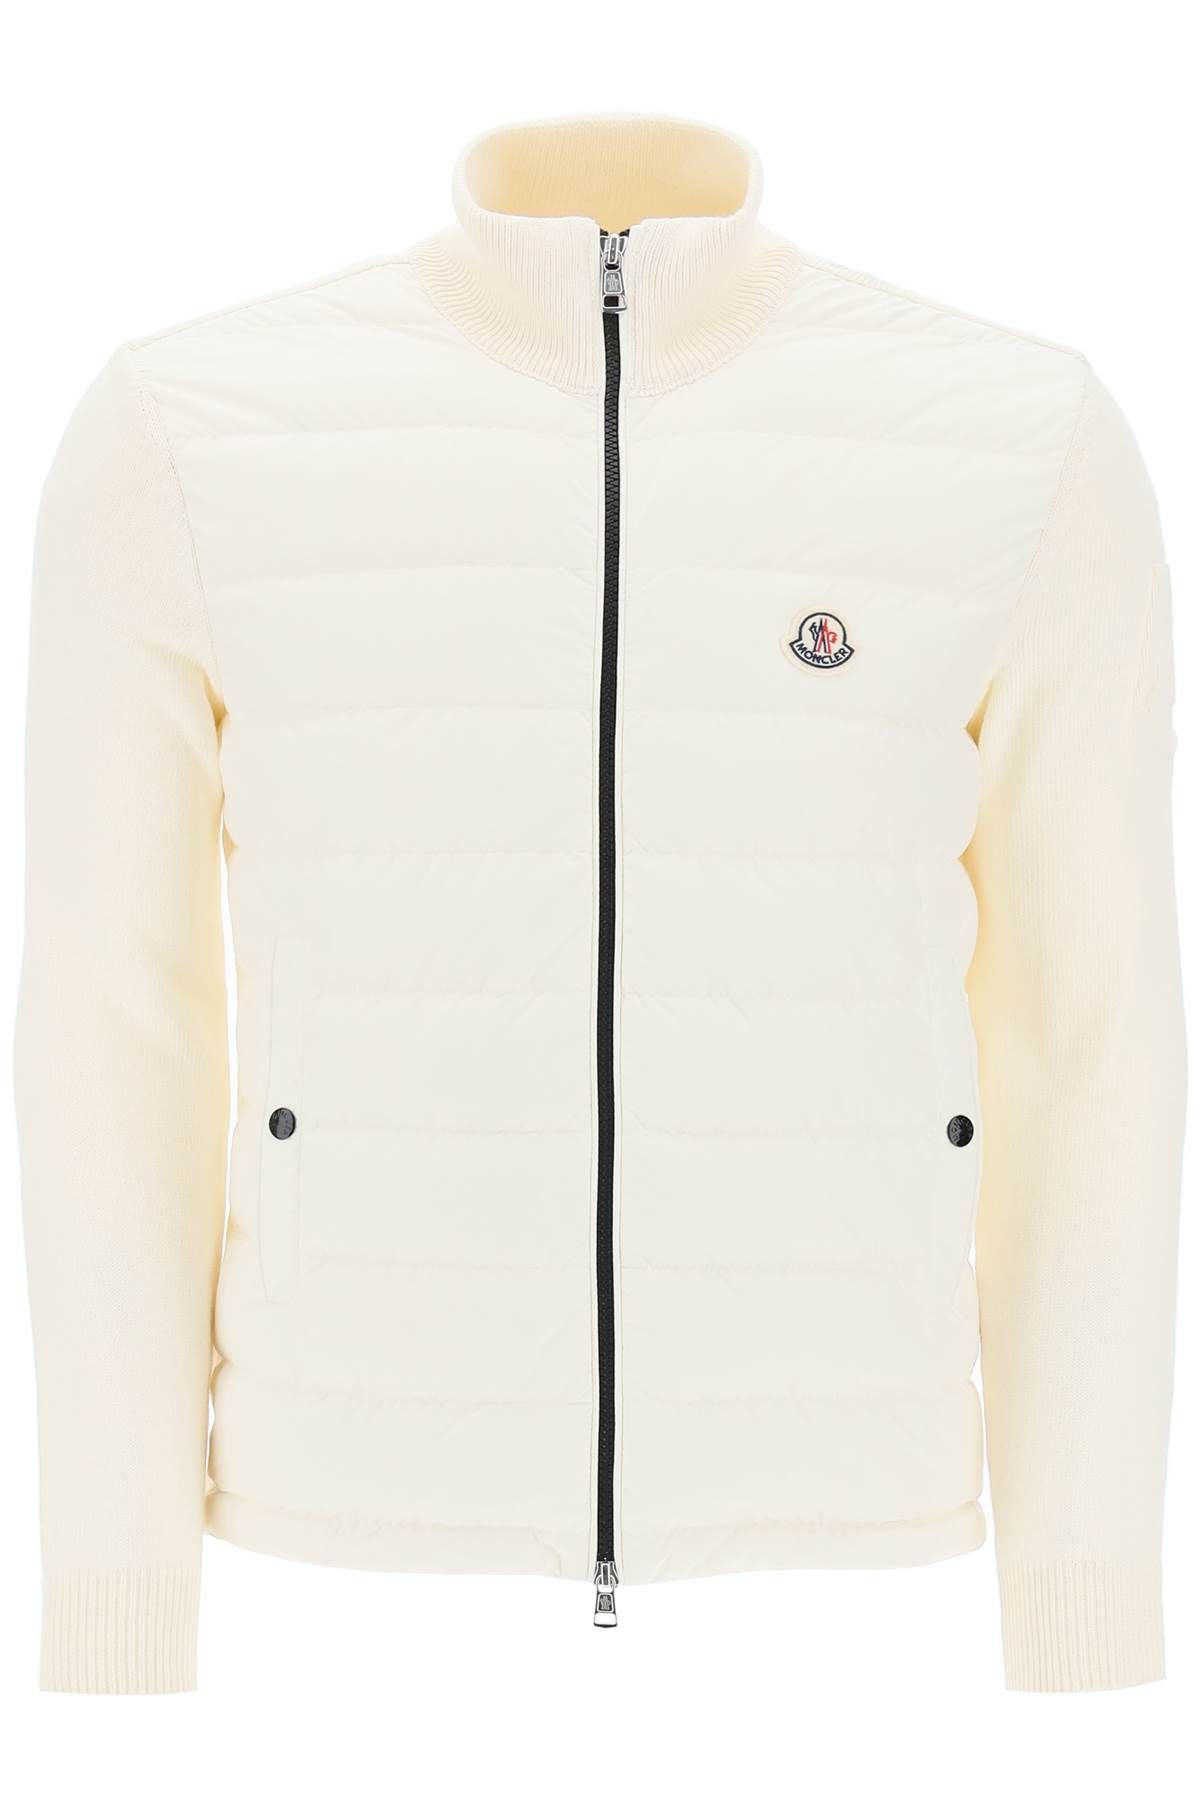 Moncler MONCLER hybrid cotton and feather cardigan